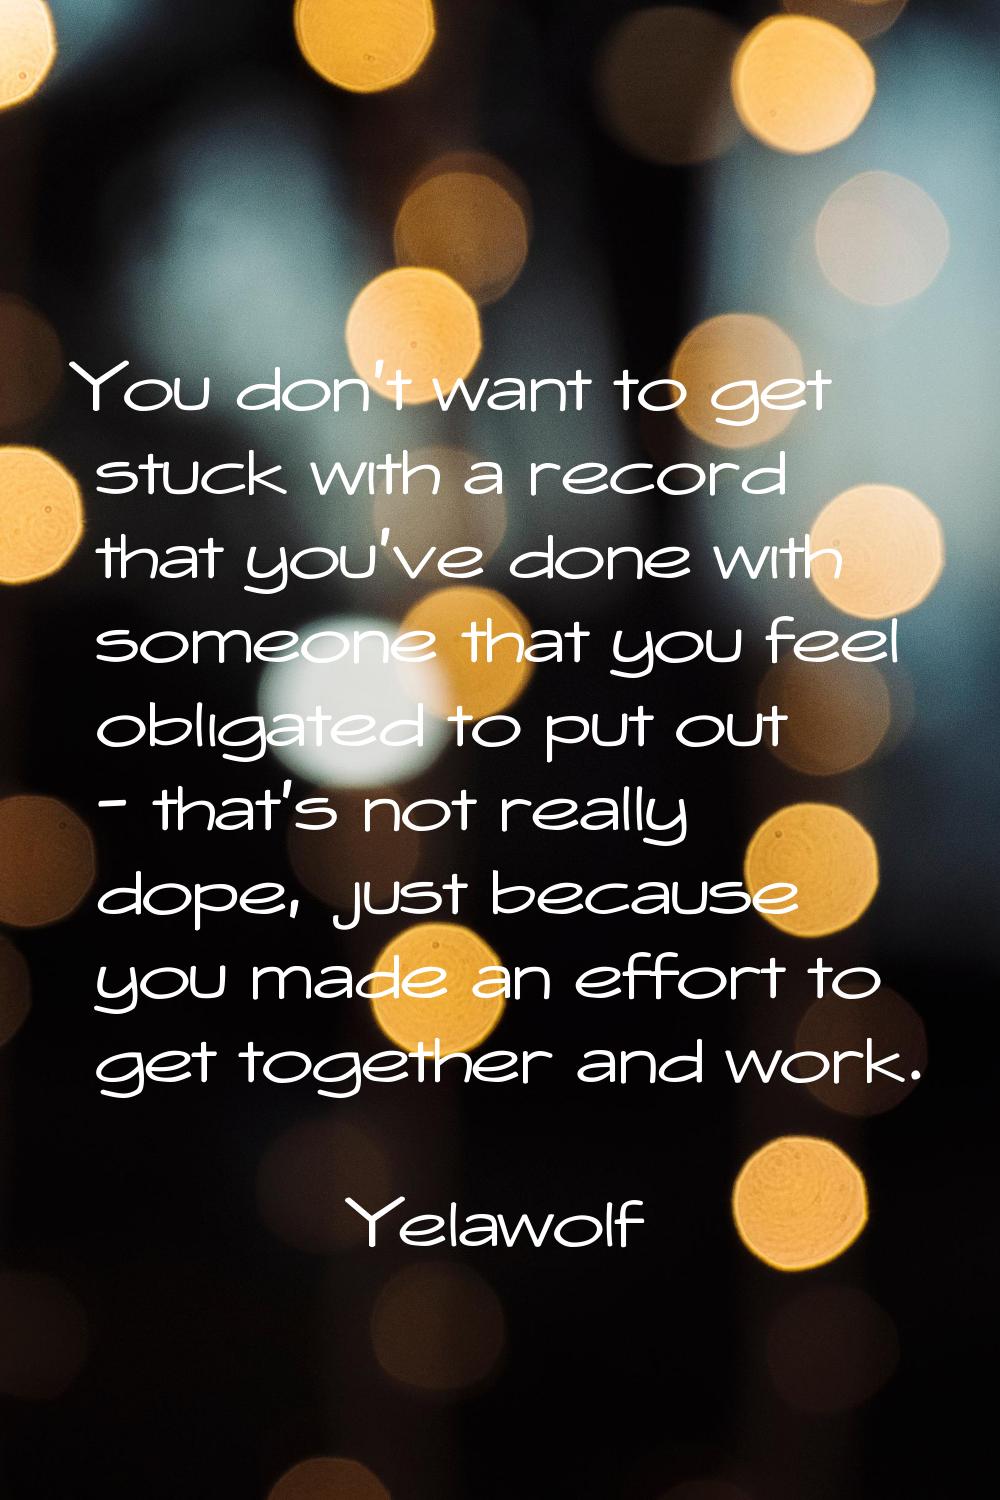 You don't want to get stuck with a record that you've done with someone that you feel obligated to 